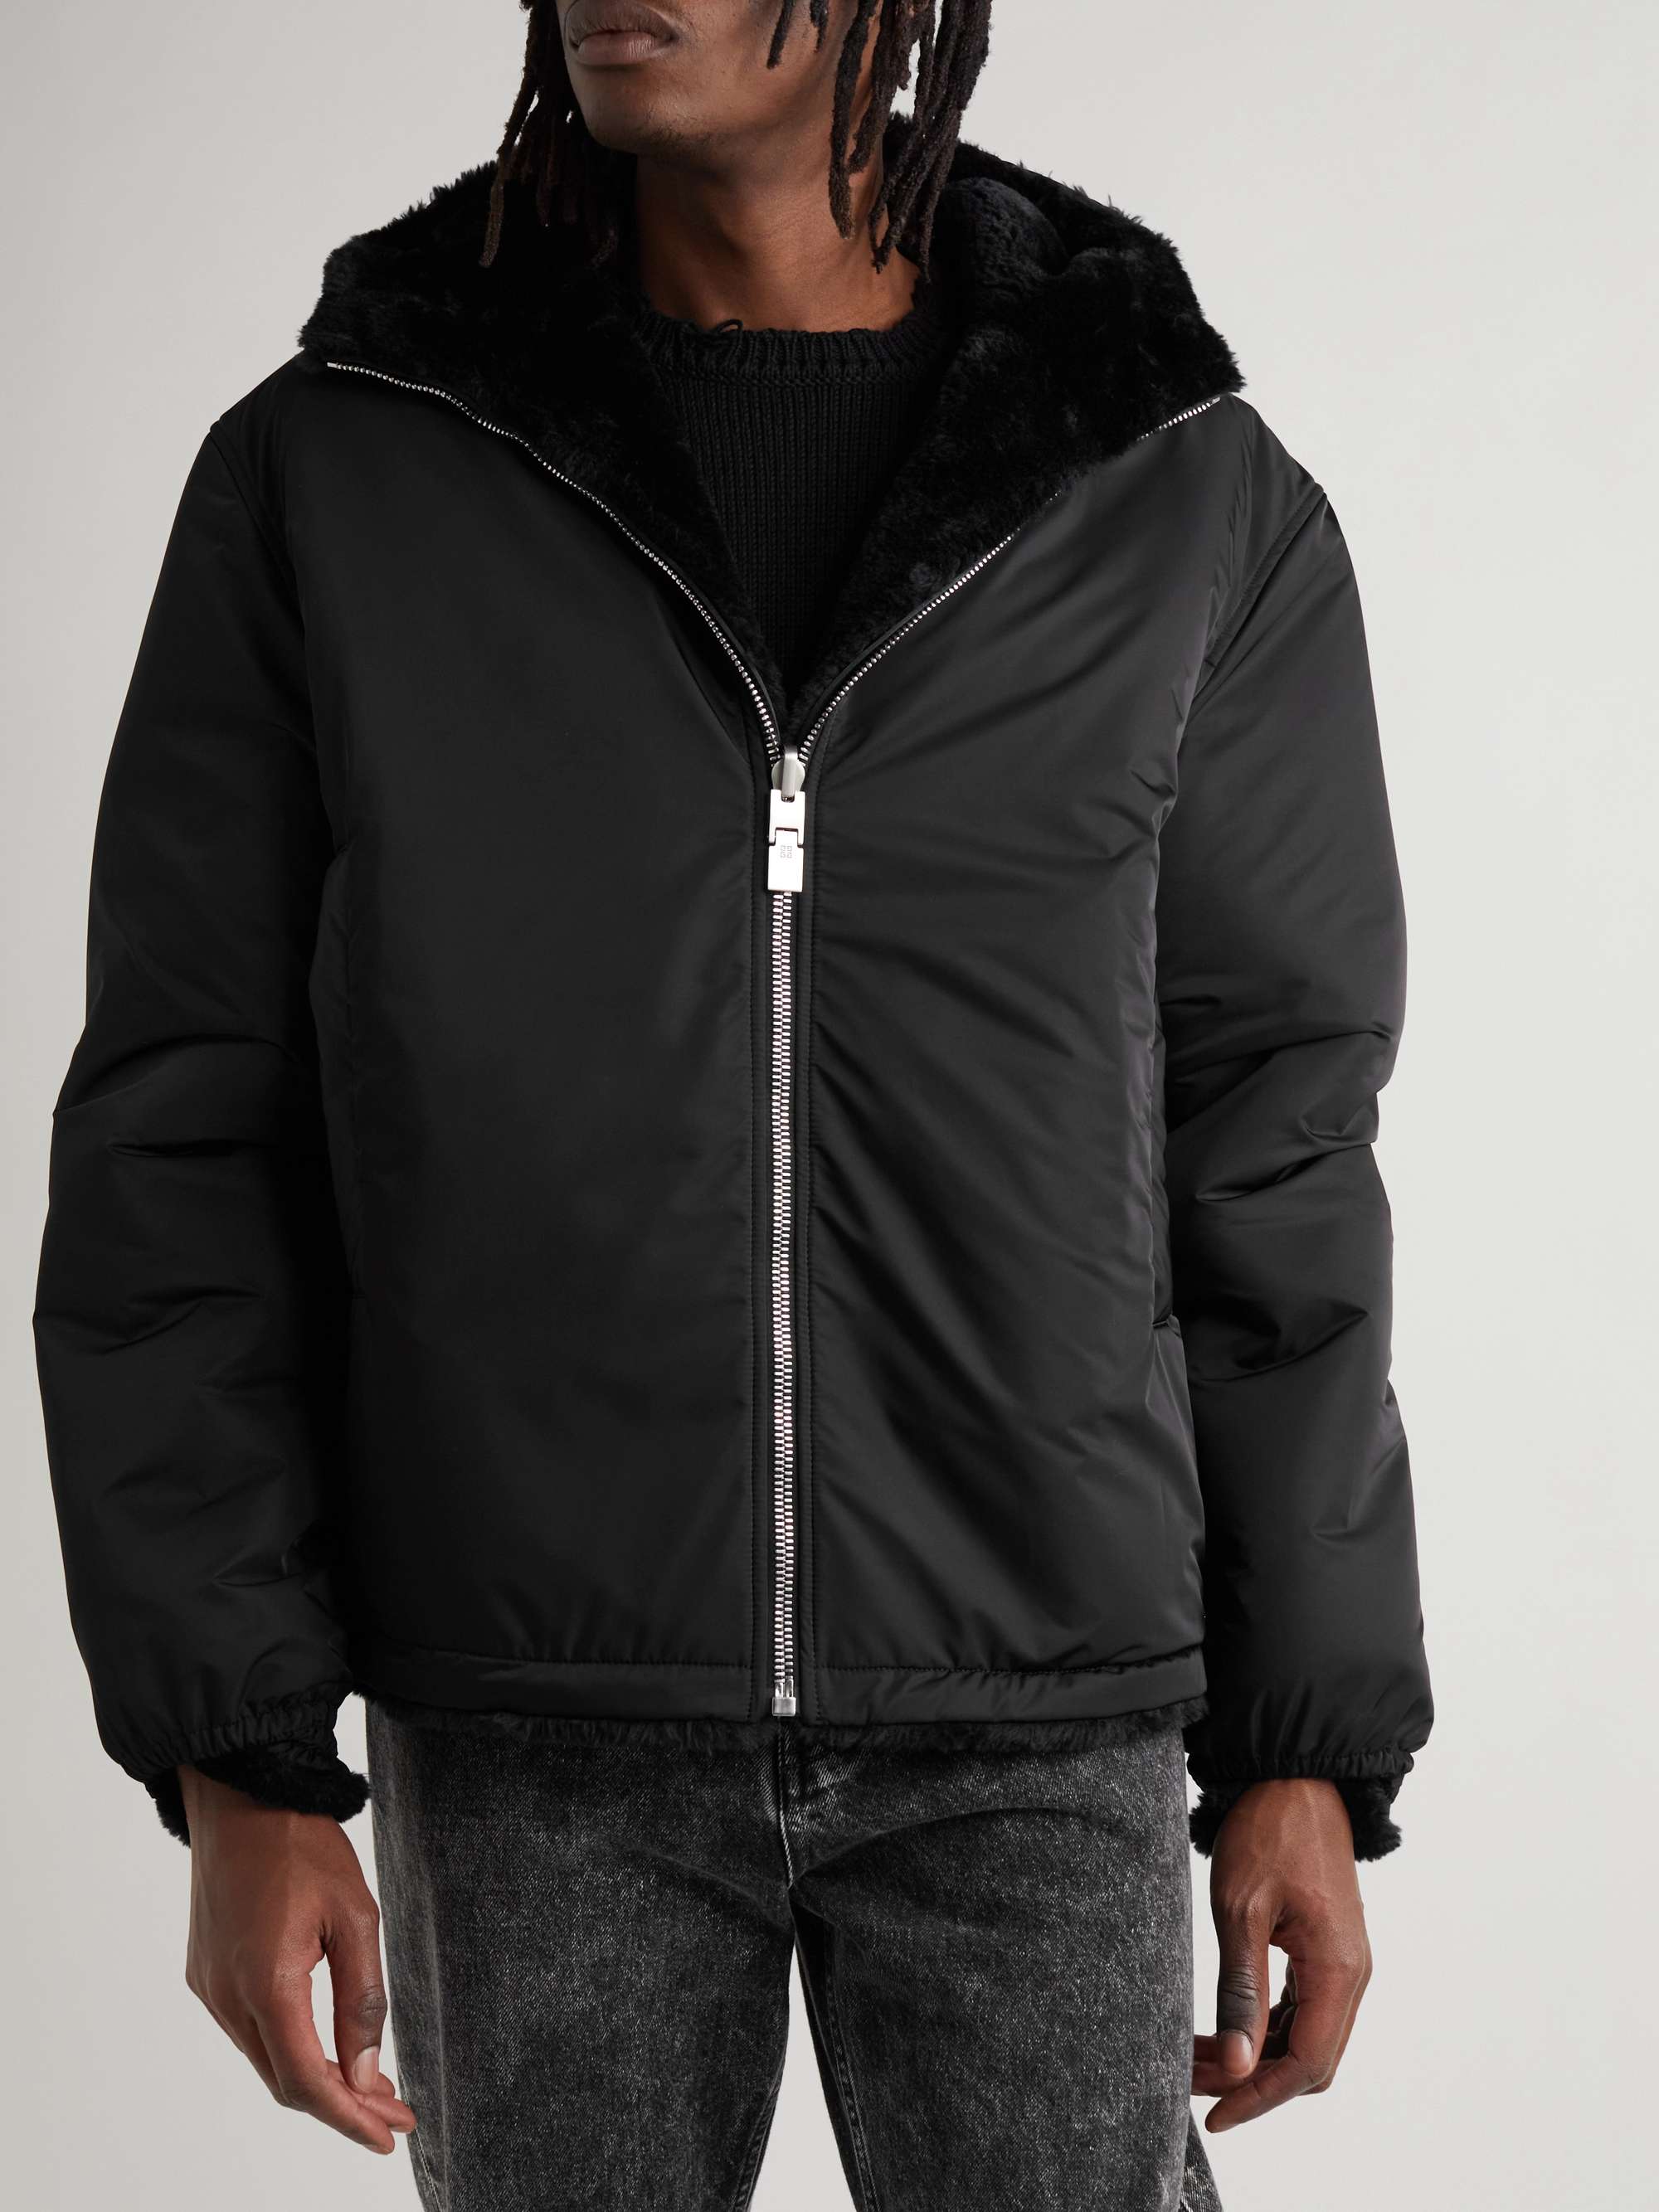 GIVENCHY Oversized Reversible Faux Fur and Shell Hooded Bomber Jacket